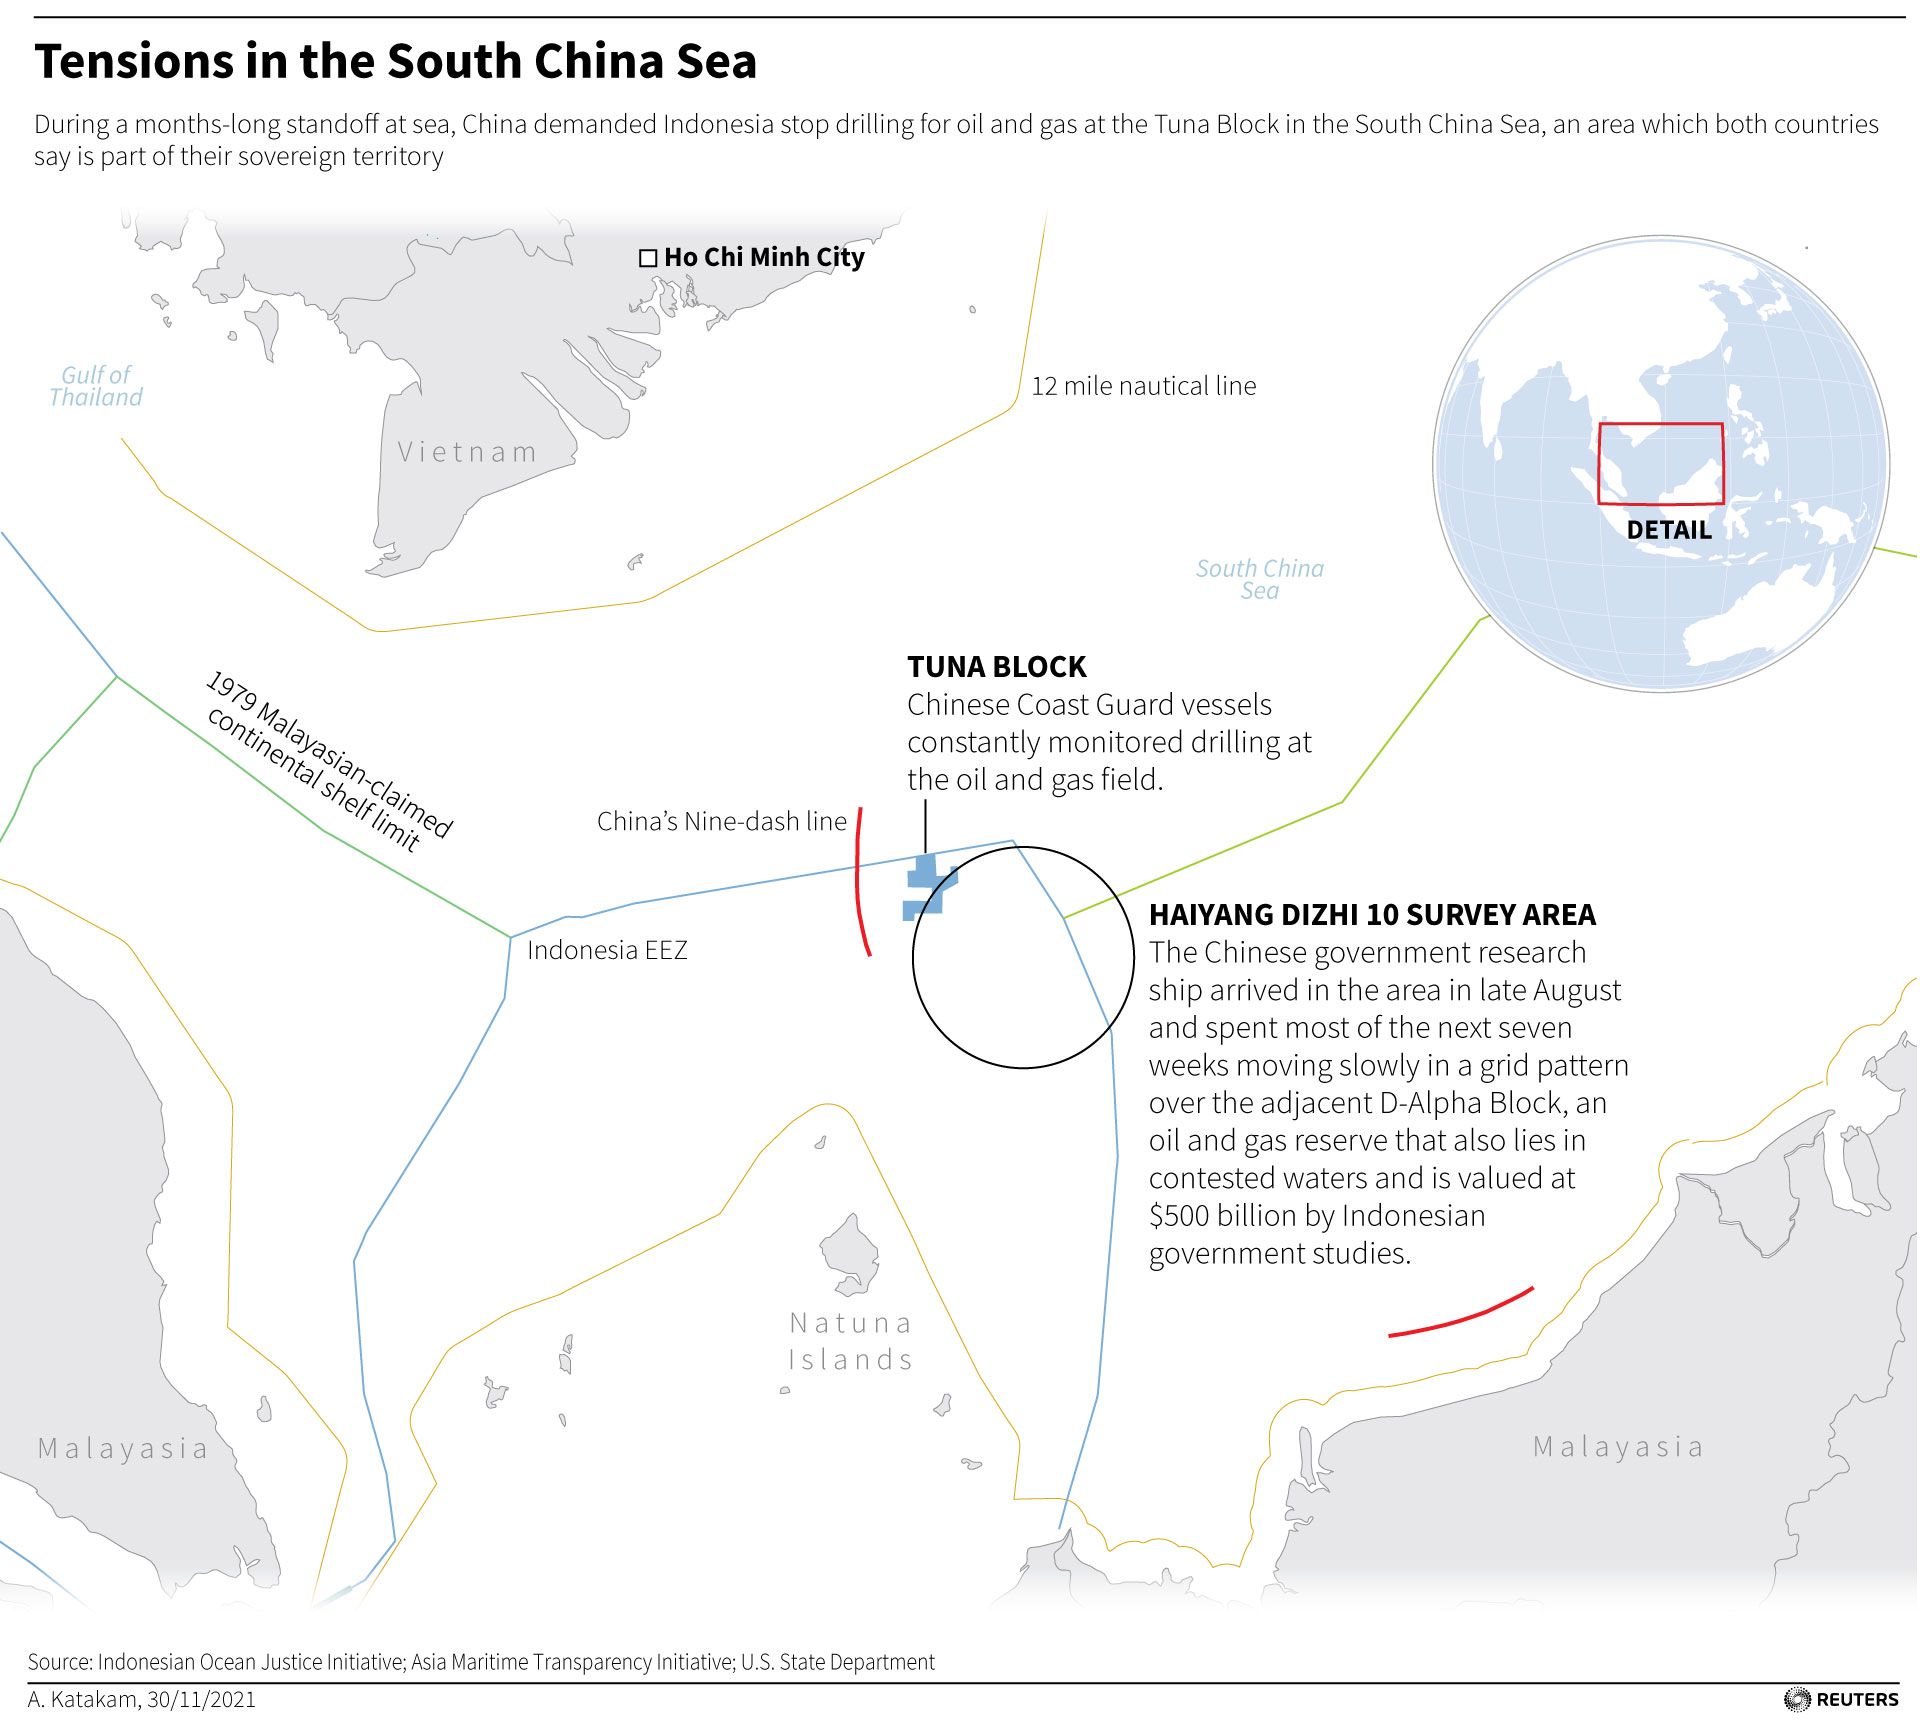 During a months-long standoff at sea, China demanded Indonesia stop drilling for oil and gas at the Tuna Block in the South China Sea, an area which both countries say is part of their sovereign territory.